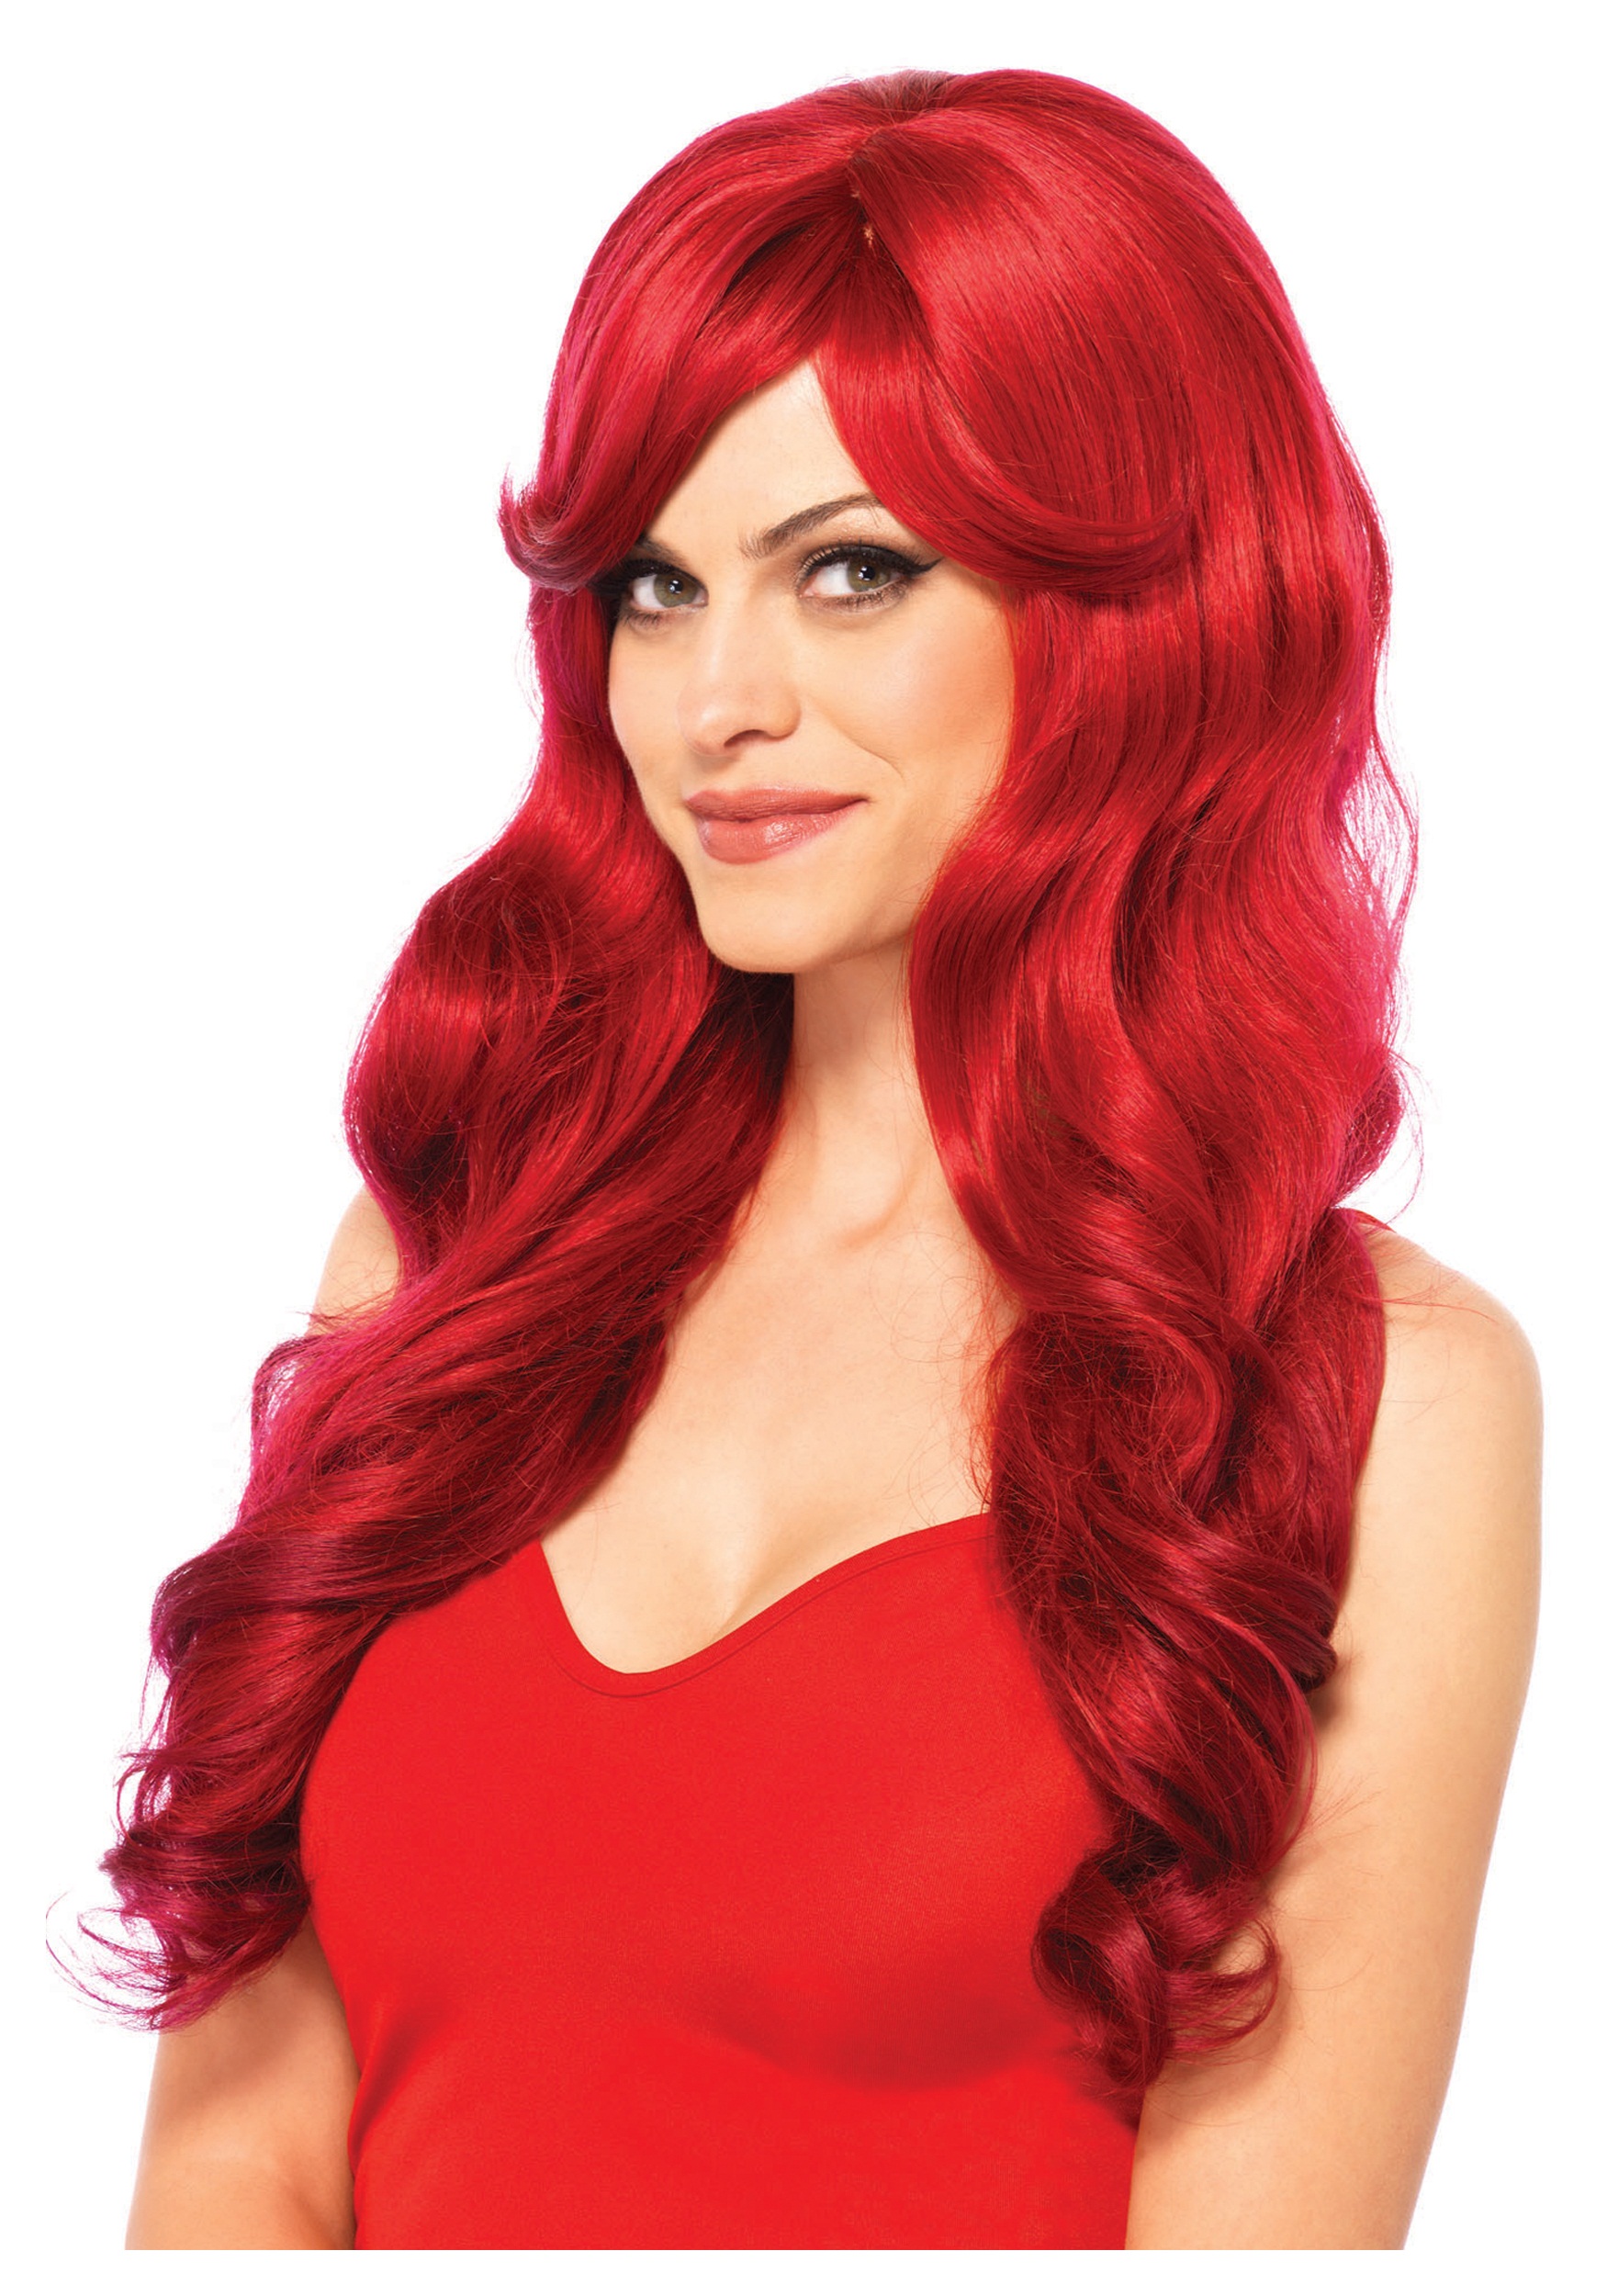 http://images.halloweencostumes.com/products/22842/1-1/long-wavy-red-wig.jpg